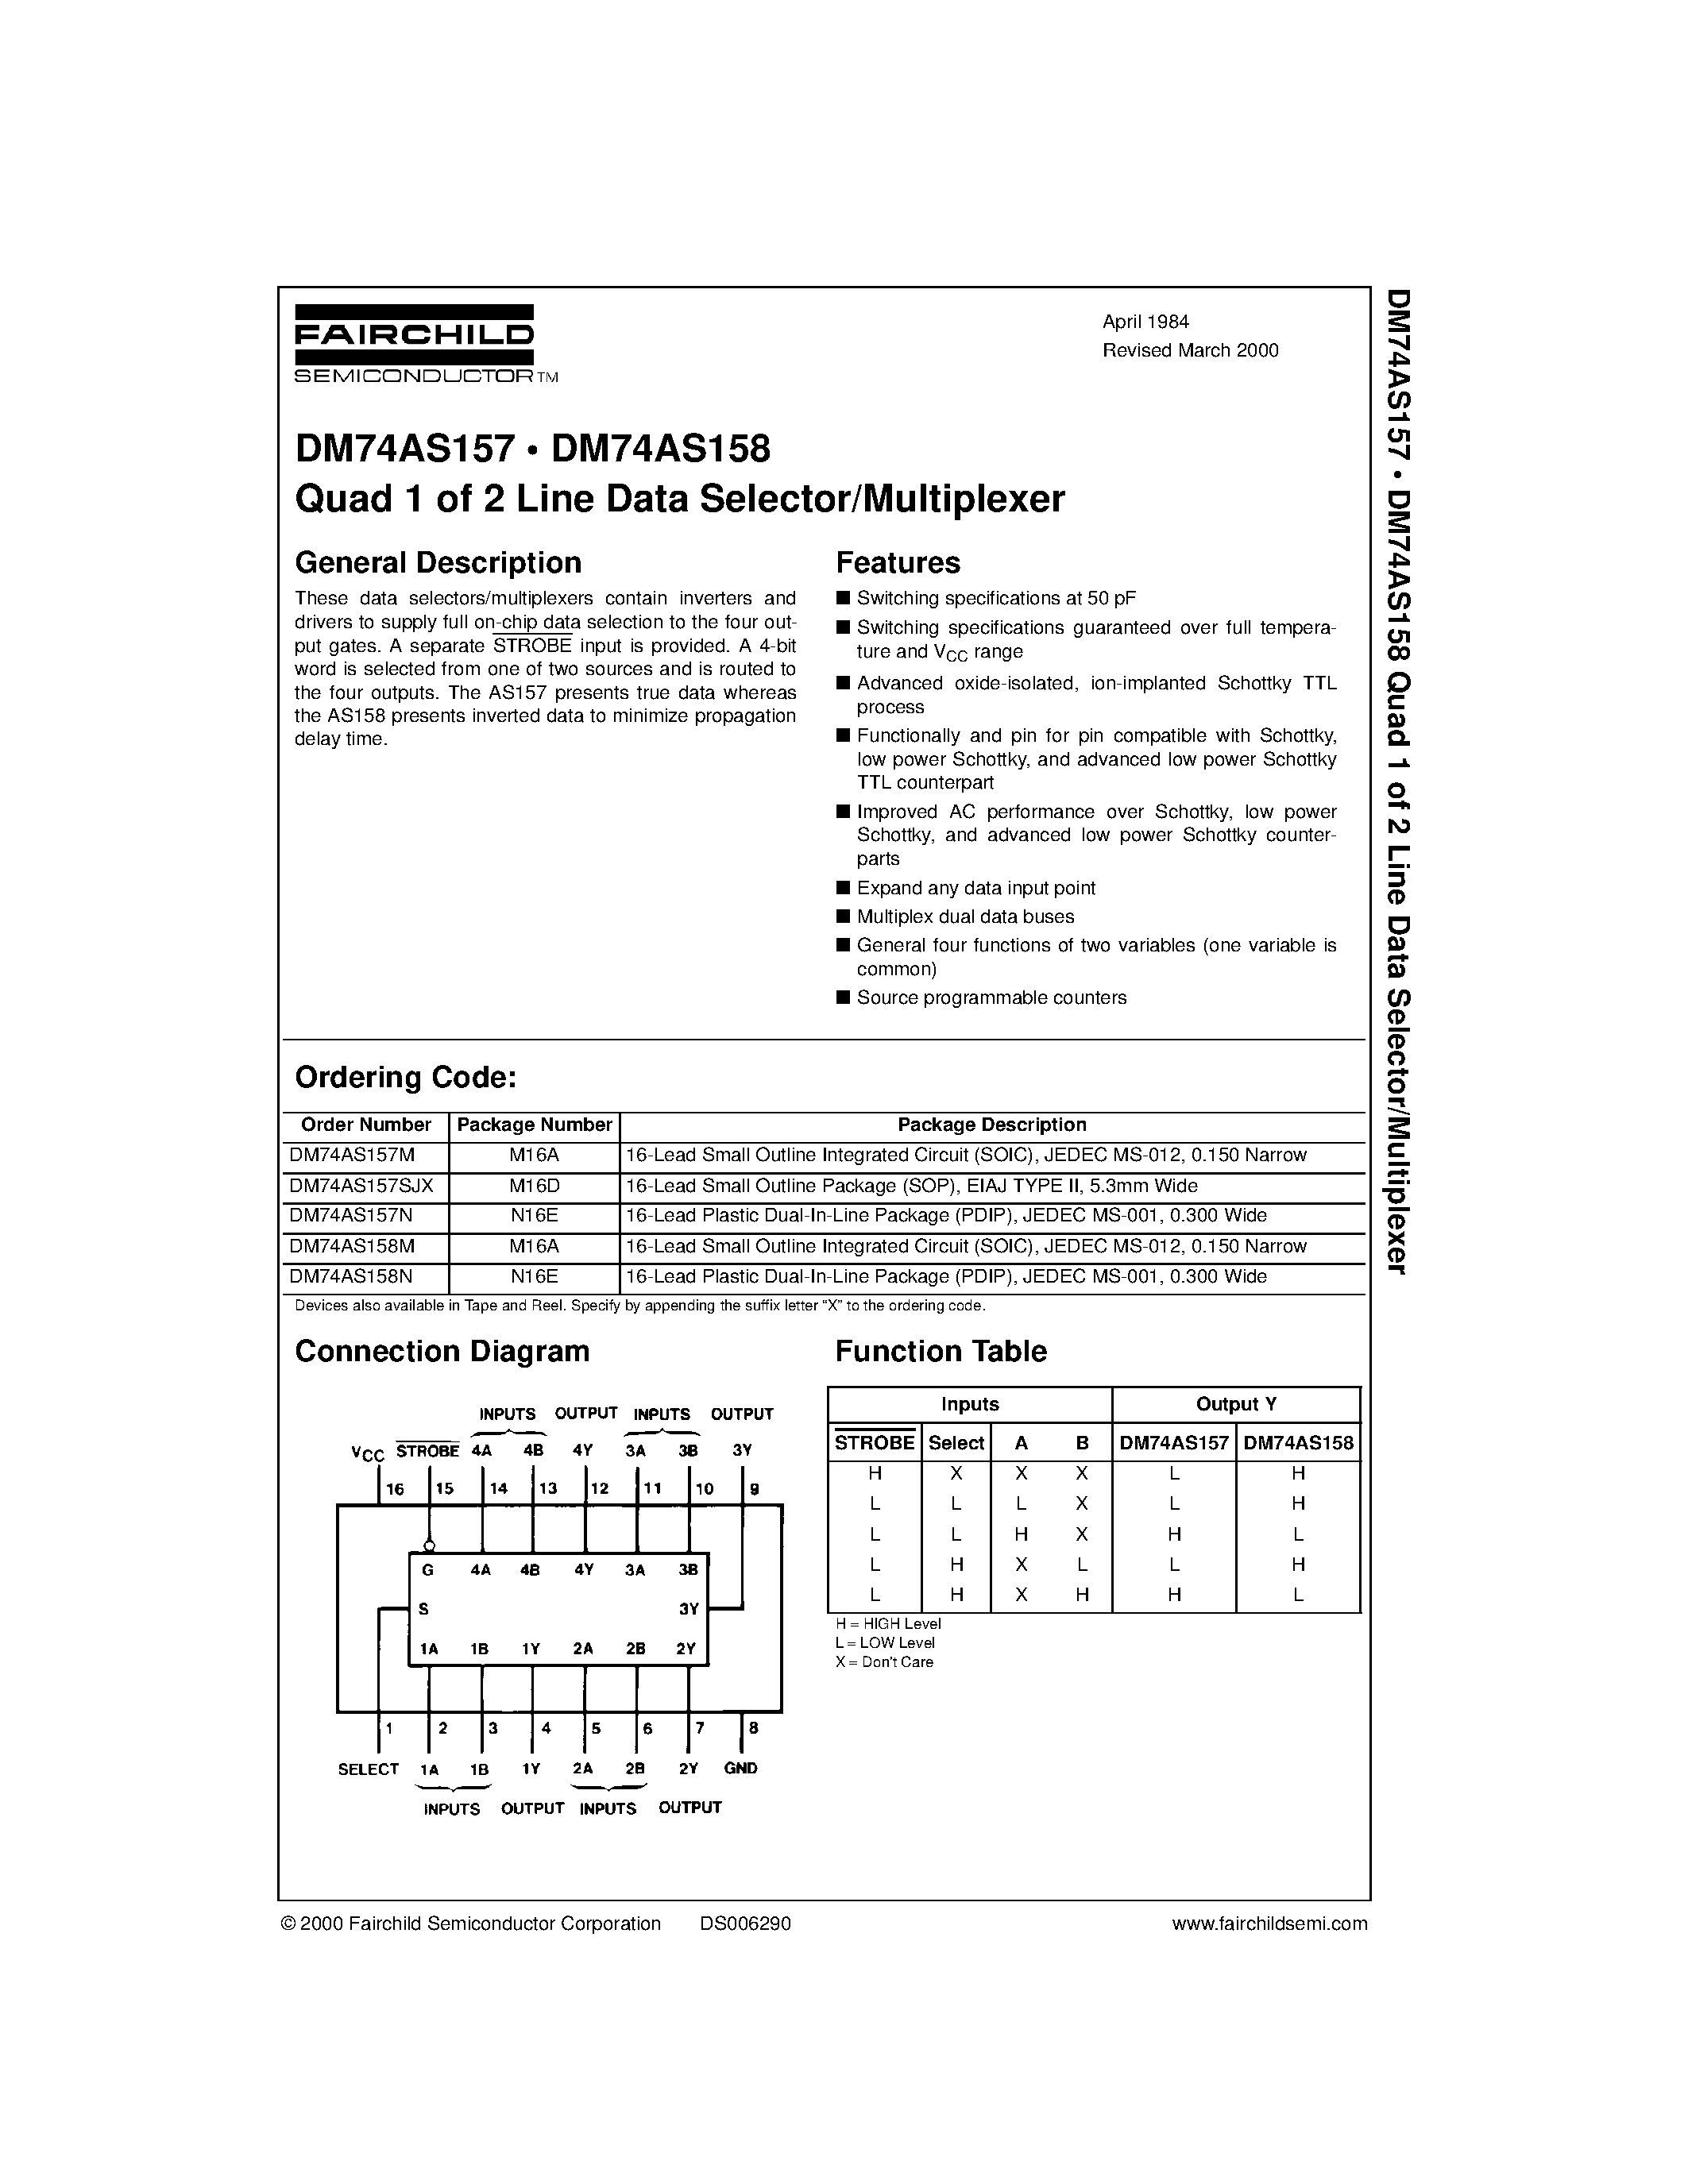 Datasheet DM74AS157 - Quad 1 of 2 Line Data Selector/Multiplexer page 1